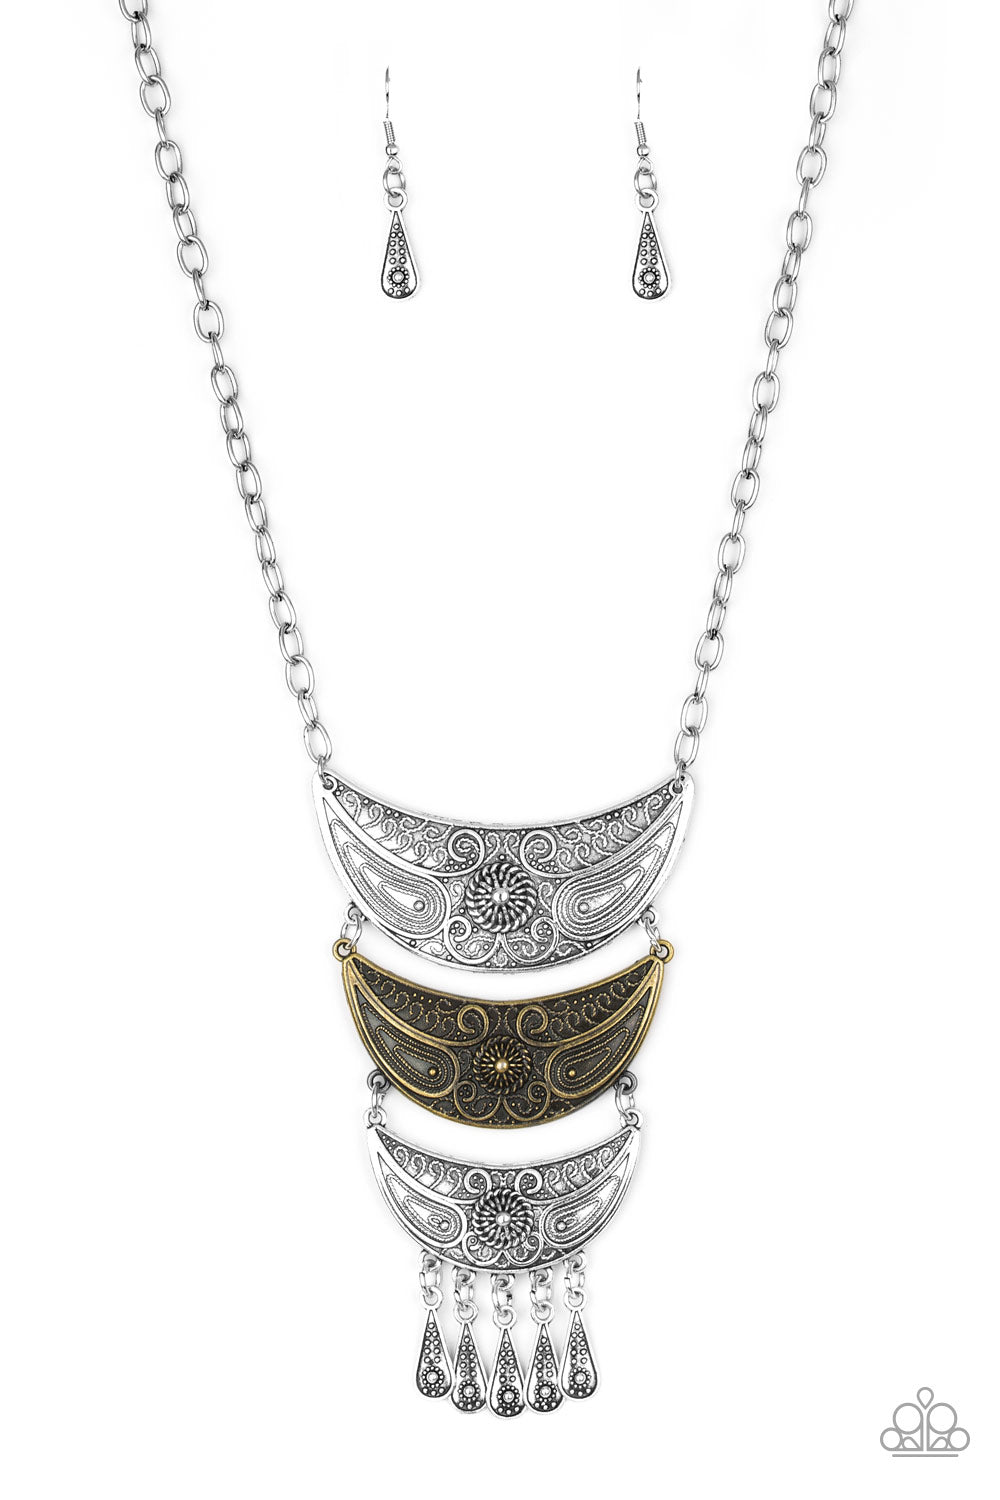 Go STEER-Crazy - Multi - Brass - Silver Necklace - Paparazzi Accessories - Gradually decreasing in size down the chest, decorative silver and brass crescent plates connect into a bold pendant. Dotted in dainty studs, teardrop silver frames swing from the bottom of the tribal inspired pendant for a fierce finish. Features an adjustable clasp closure.